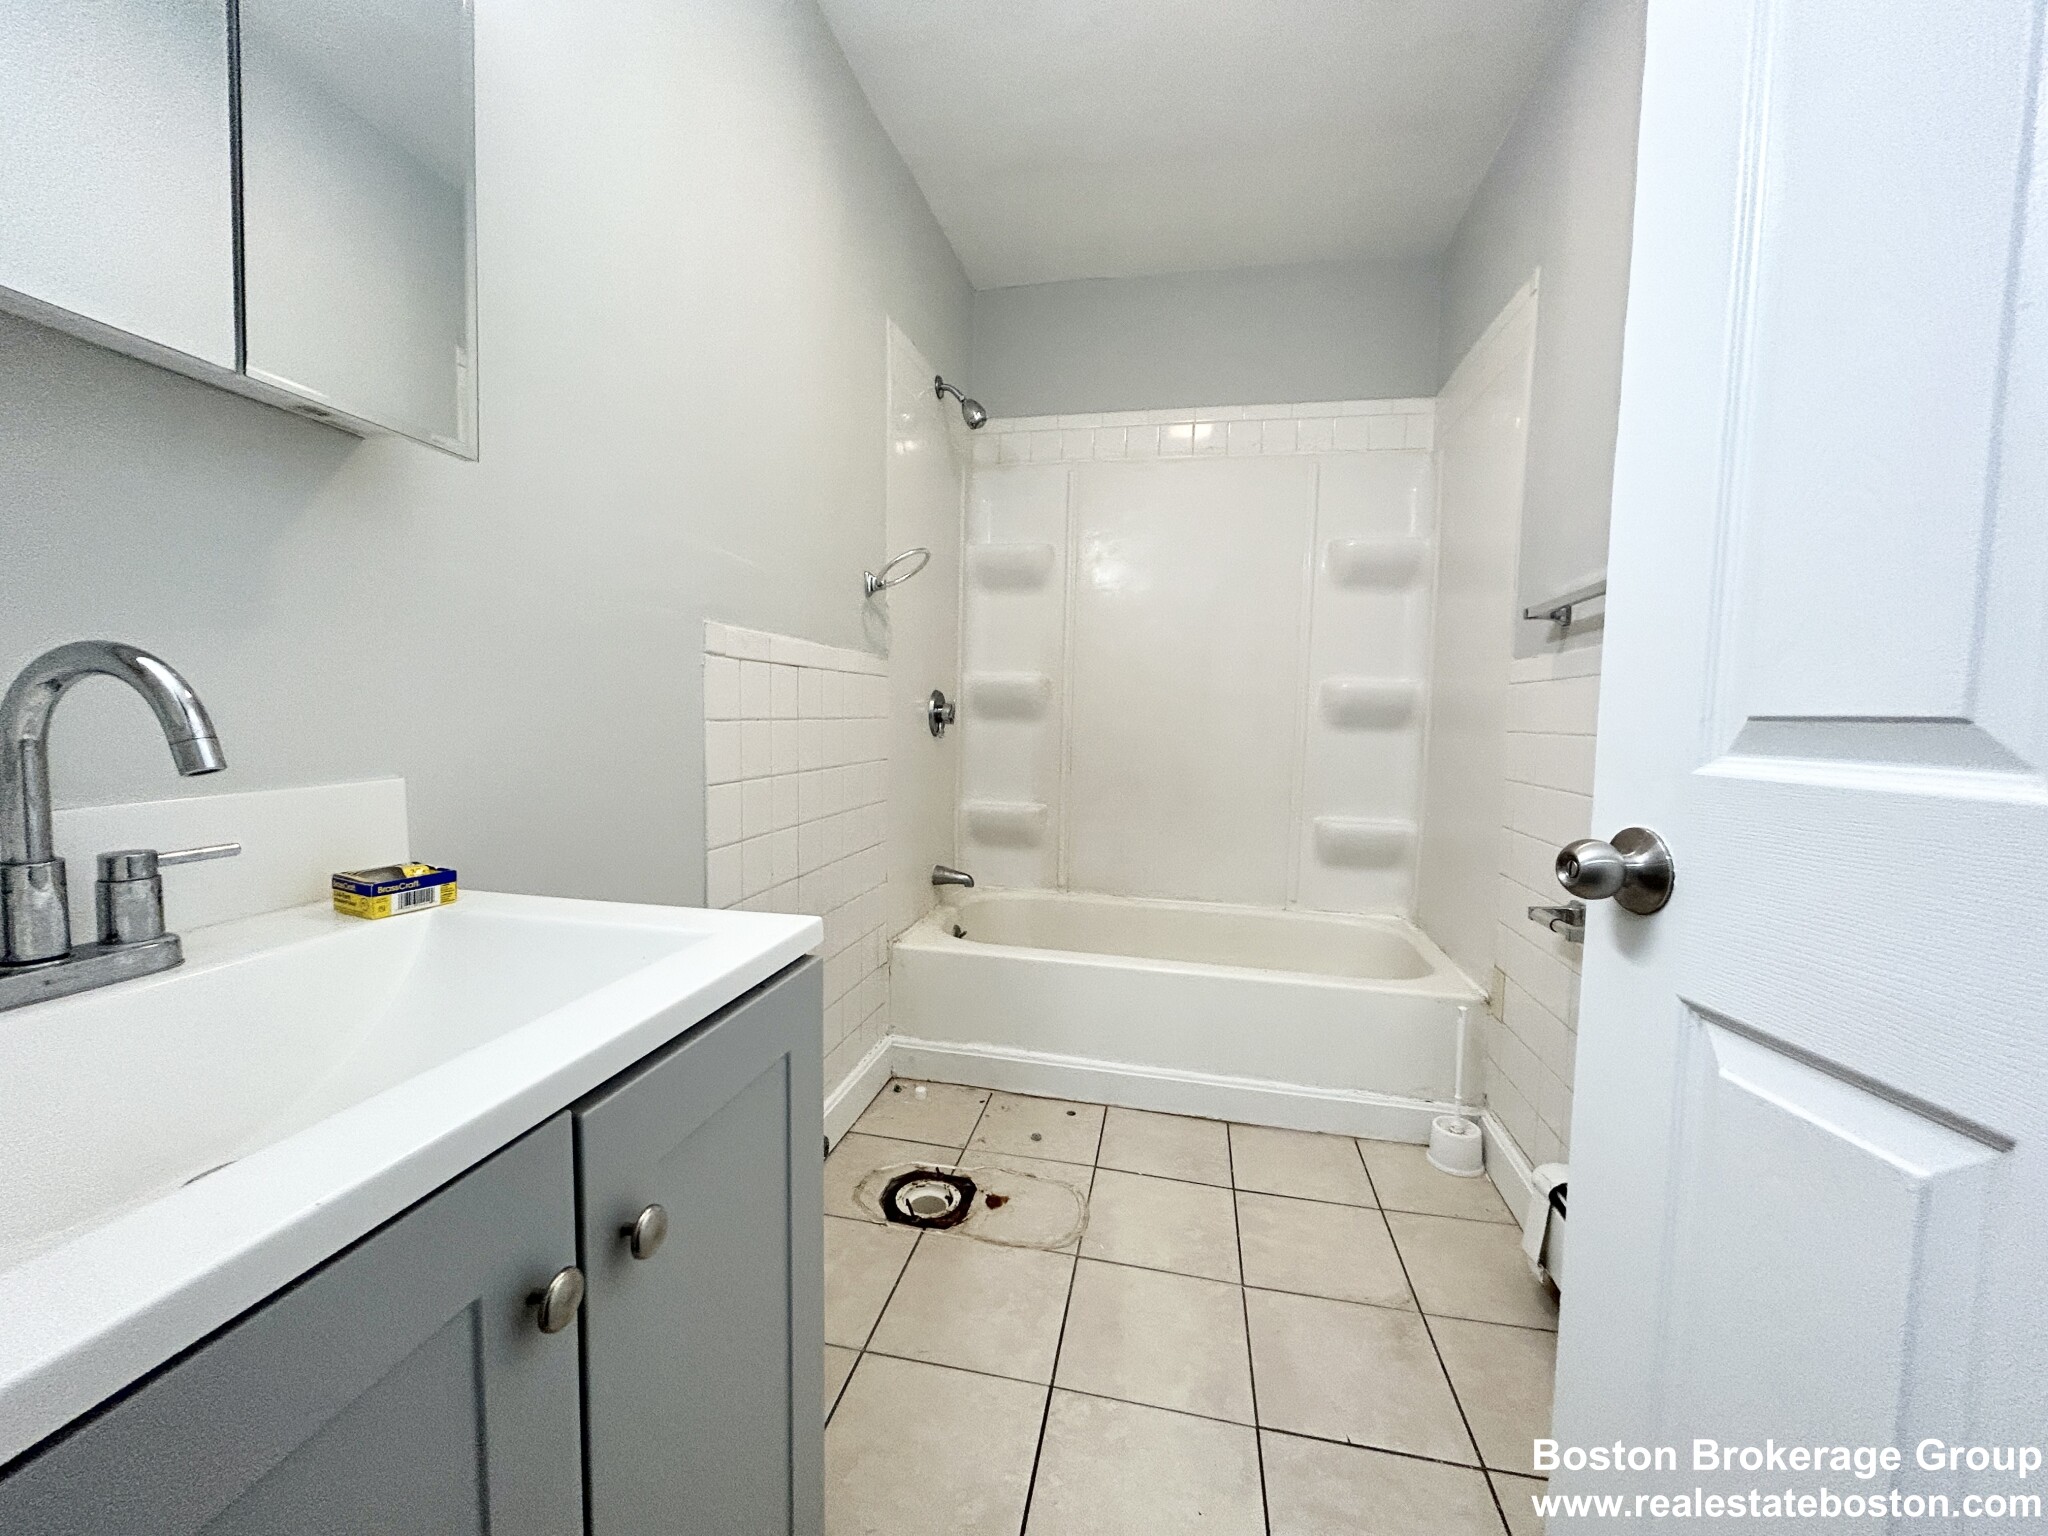 Photos of apartment on Ruggles St.,Boston MA 02119